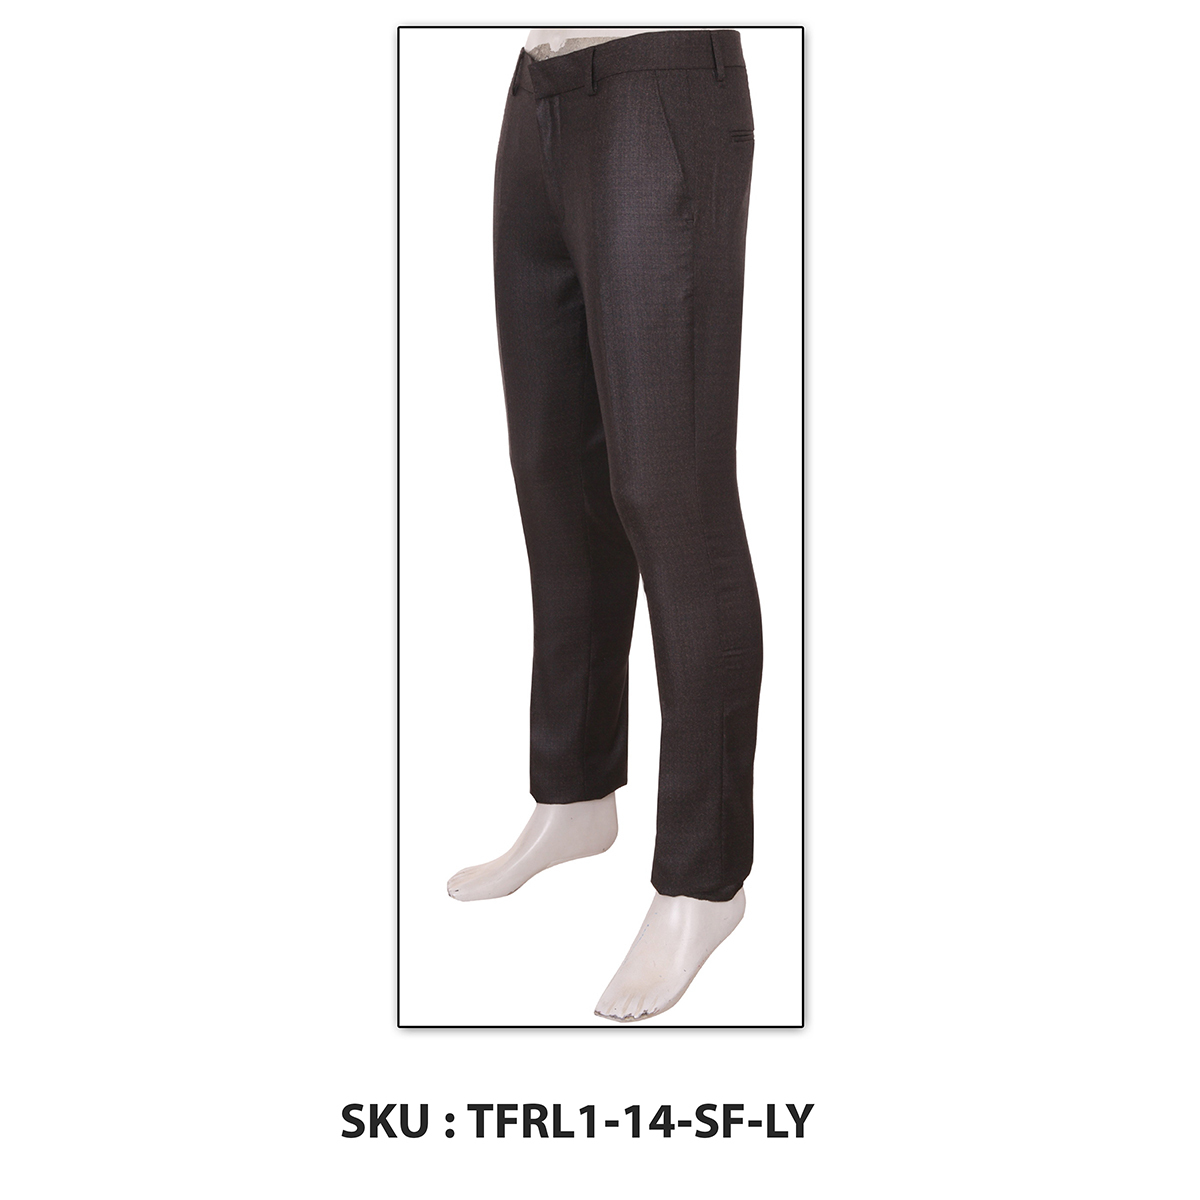 Classic Polo Mens Trousers Tfrl1-14-Sf-Ly Brown 34